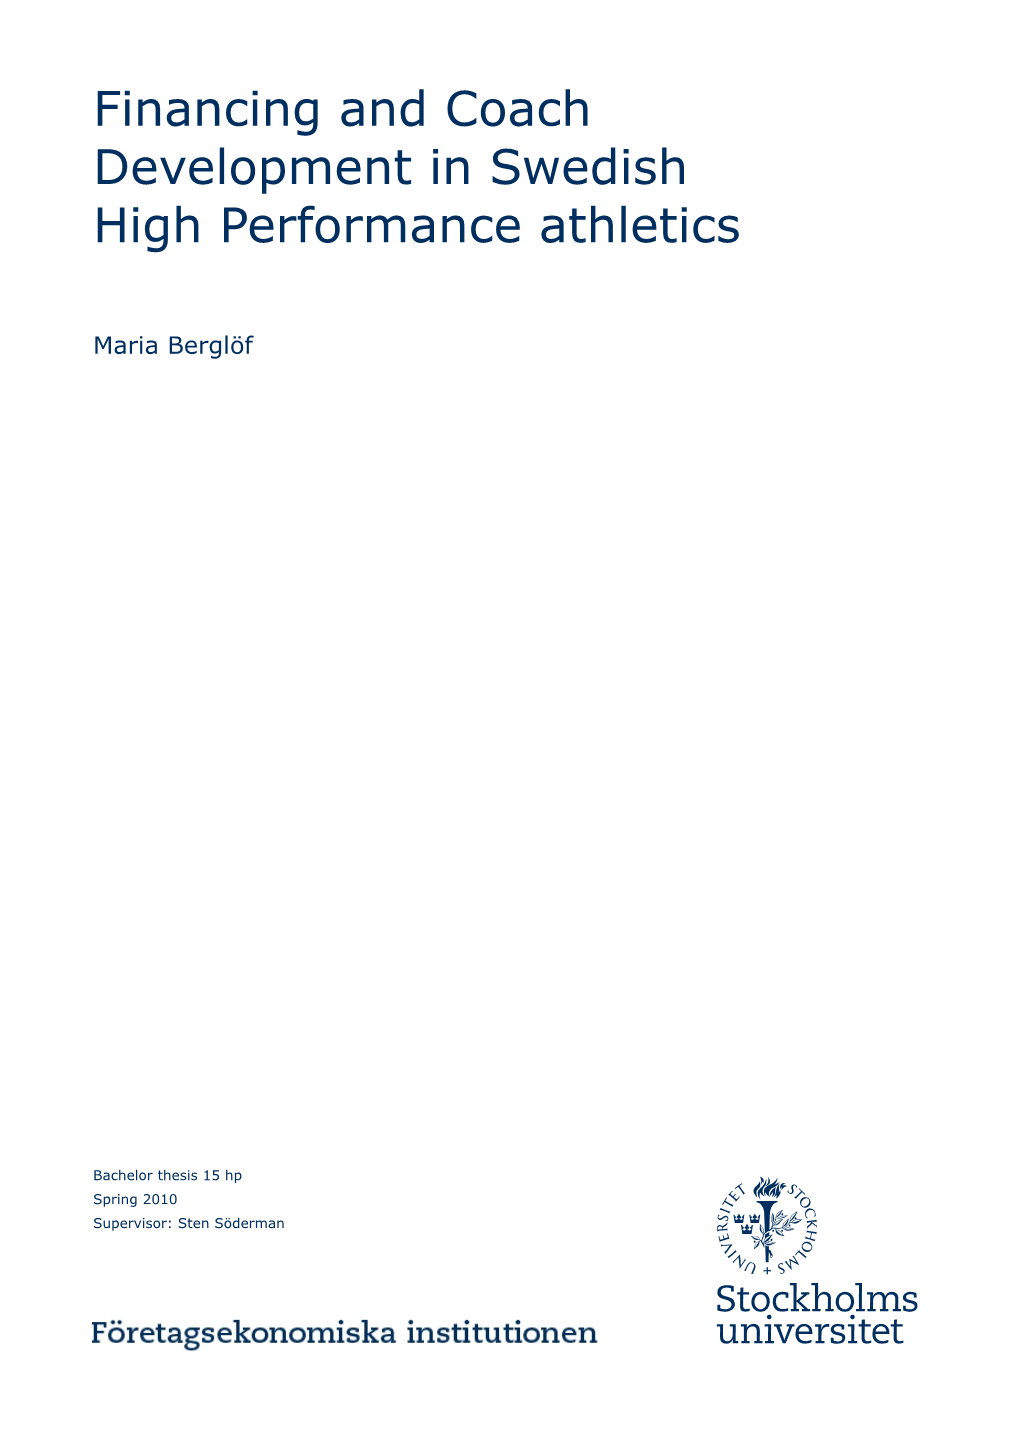 Financing and Coach Development in Swedish High Performance Athletics